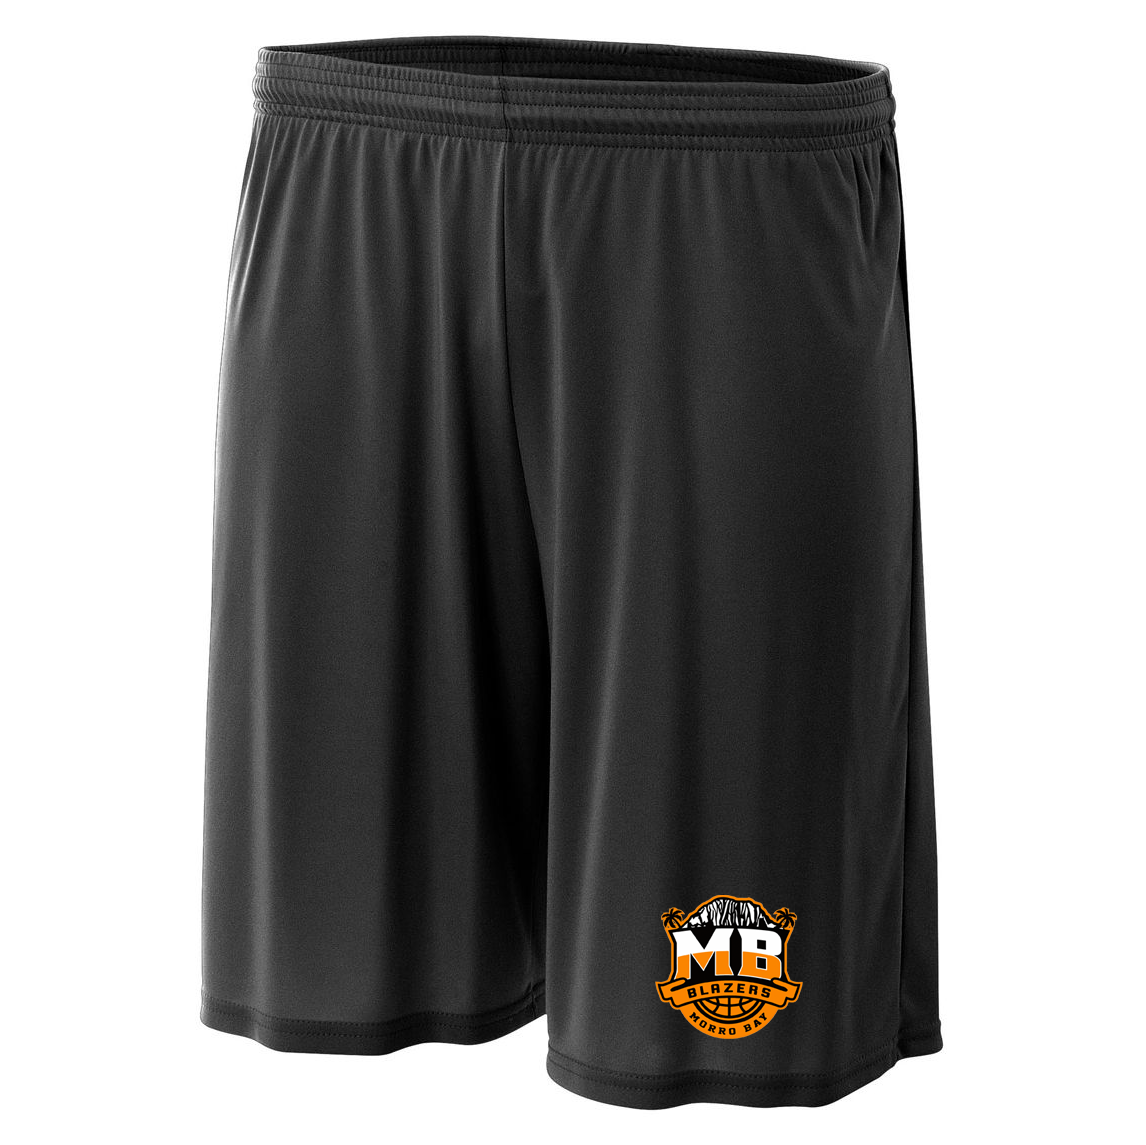 MB Blazers Cooling 7" Performance Shorts